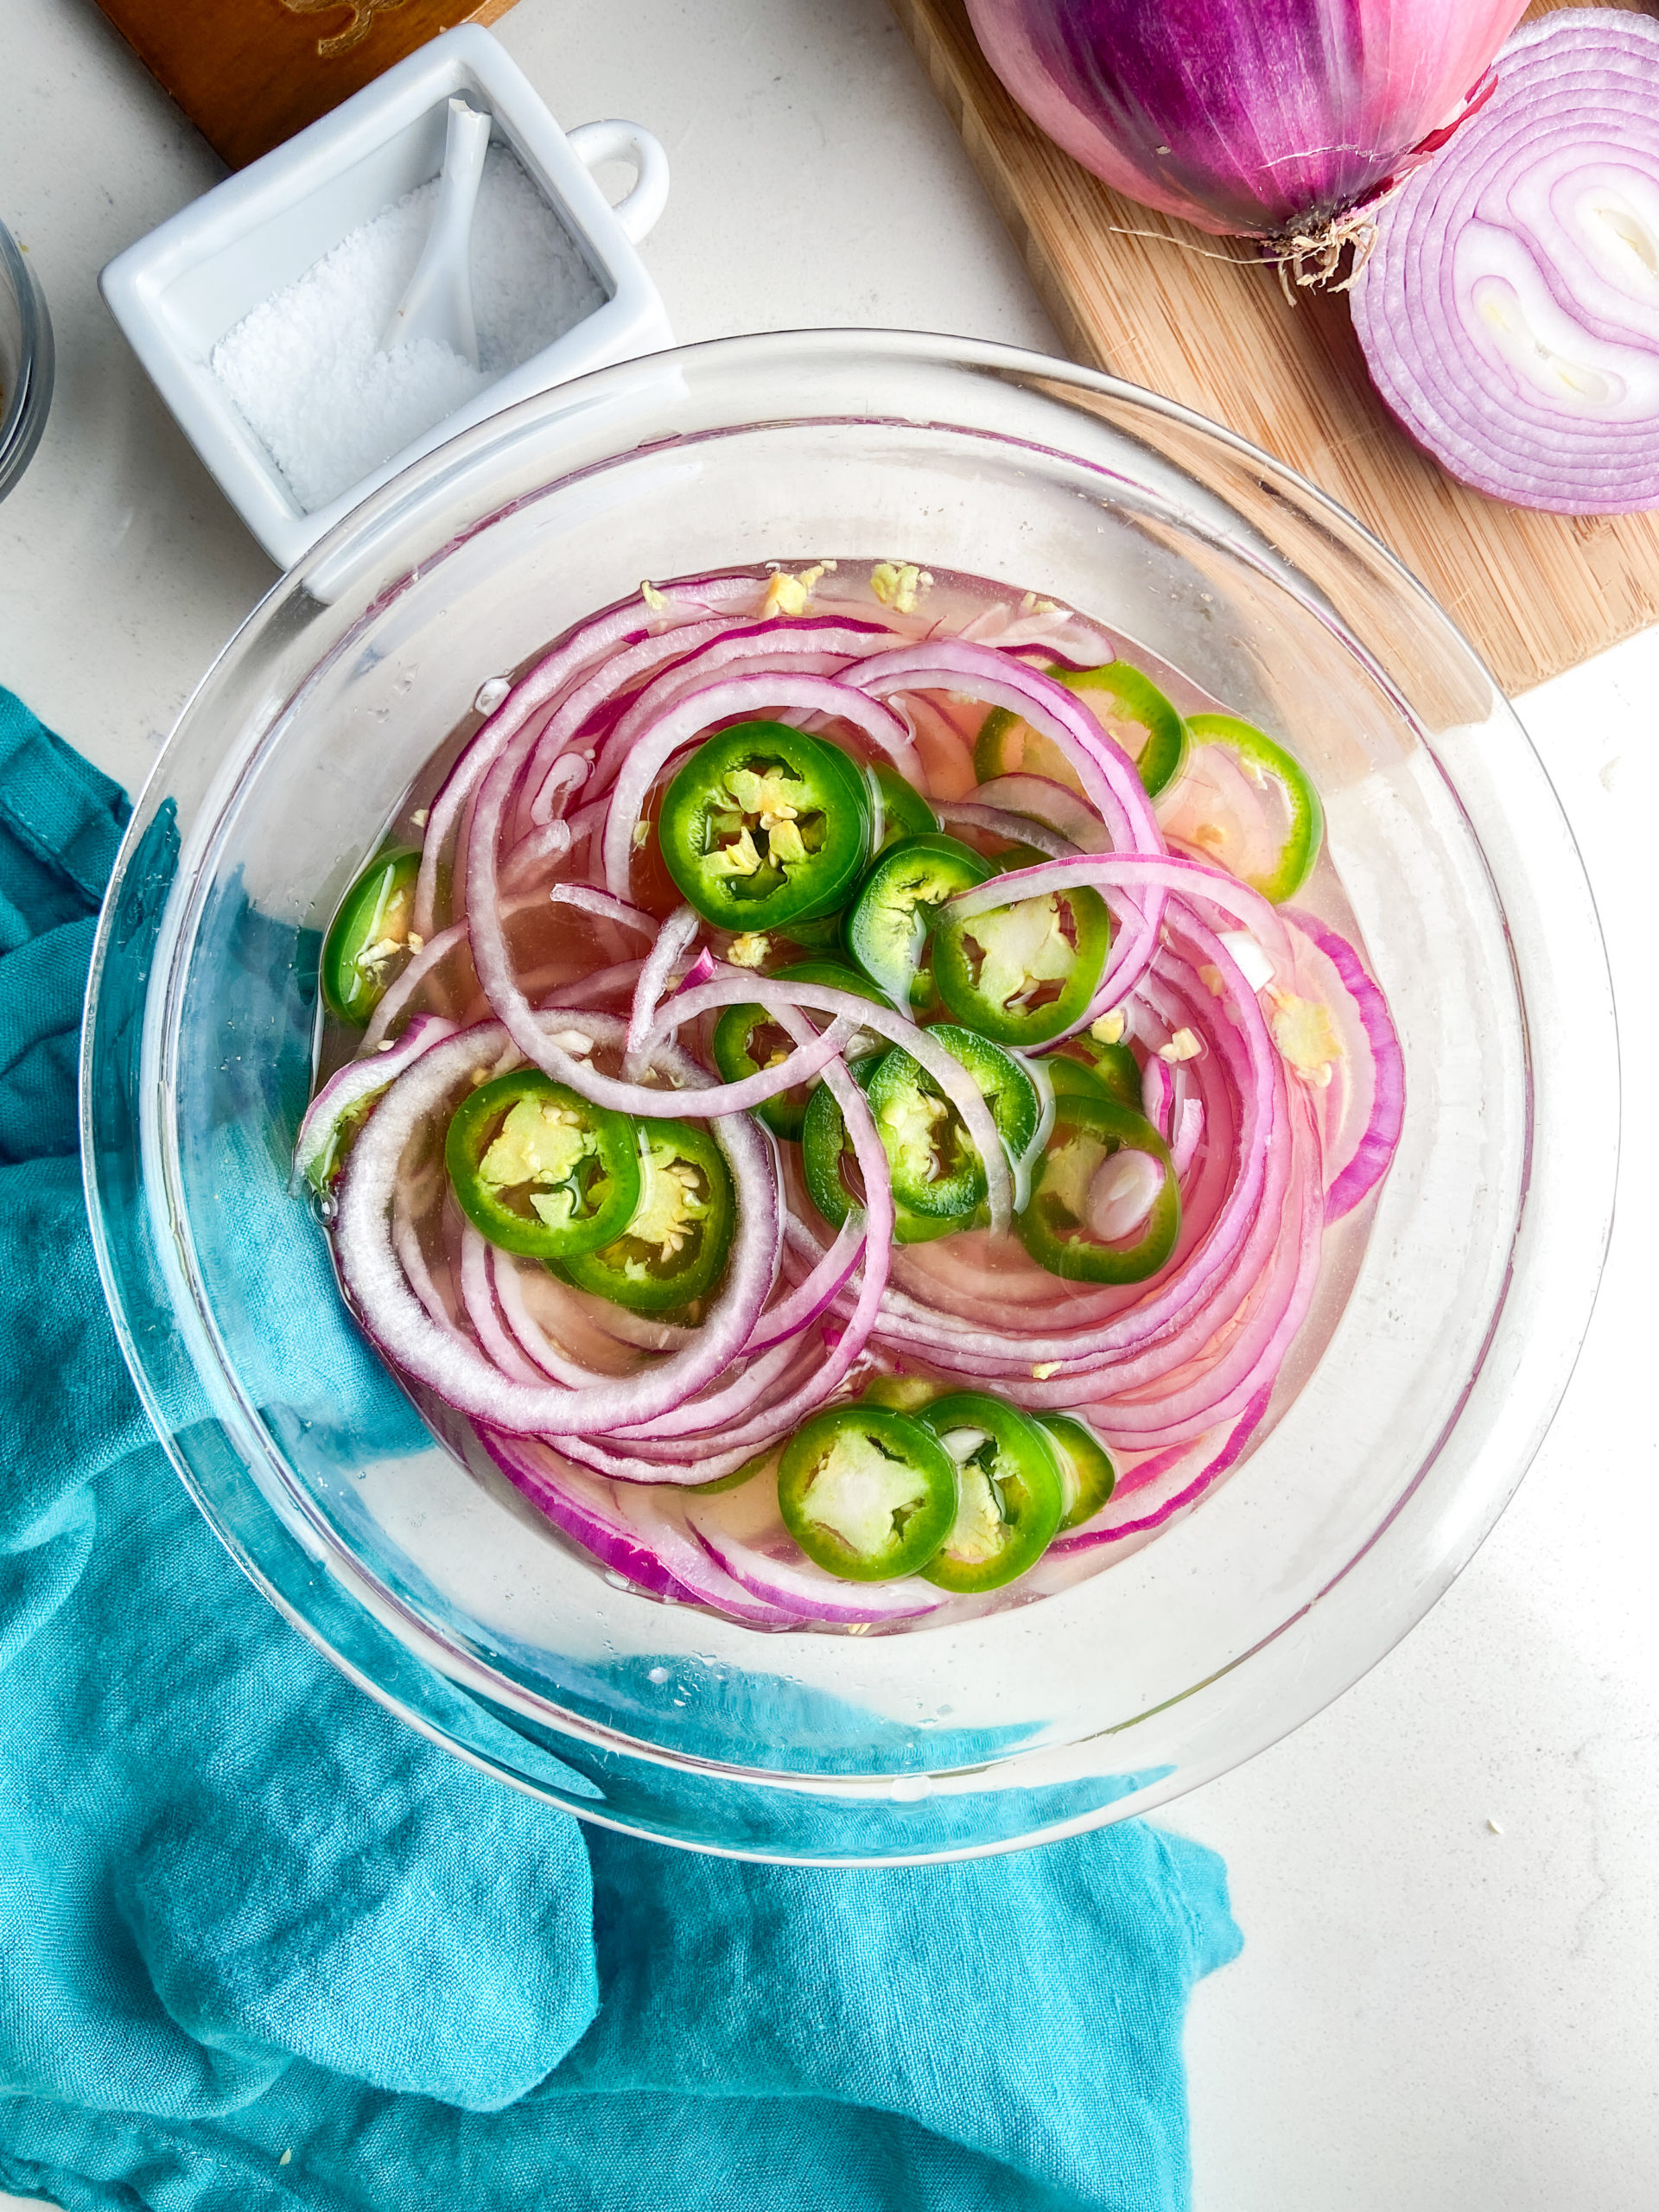 https://www.lifesambrosia.com/wp-content/uploads/xQuick-Pickled-Red-Onions-Recipe-Photo-3-scaled.jpg.pagespeed.ic.dtmZH8ePV9.jpg